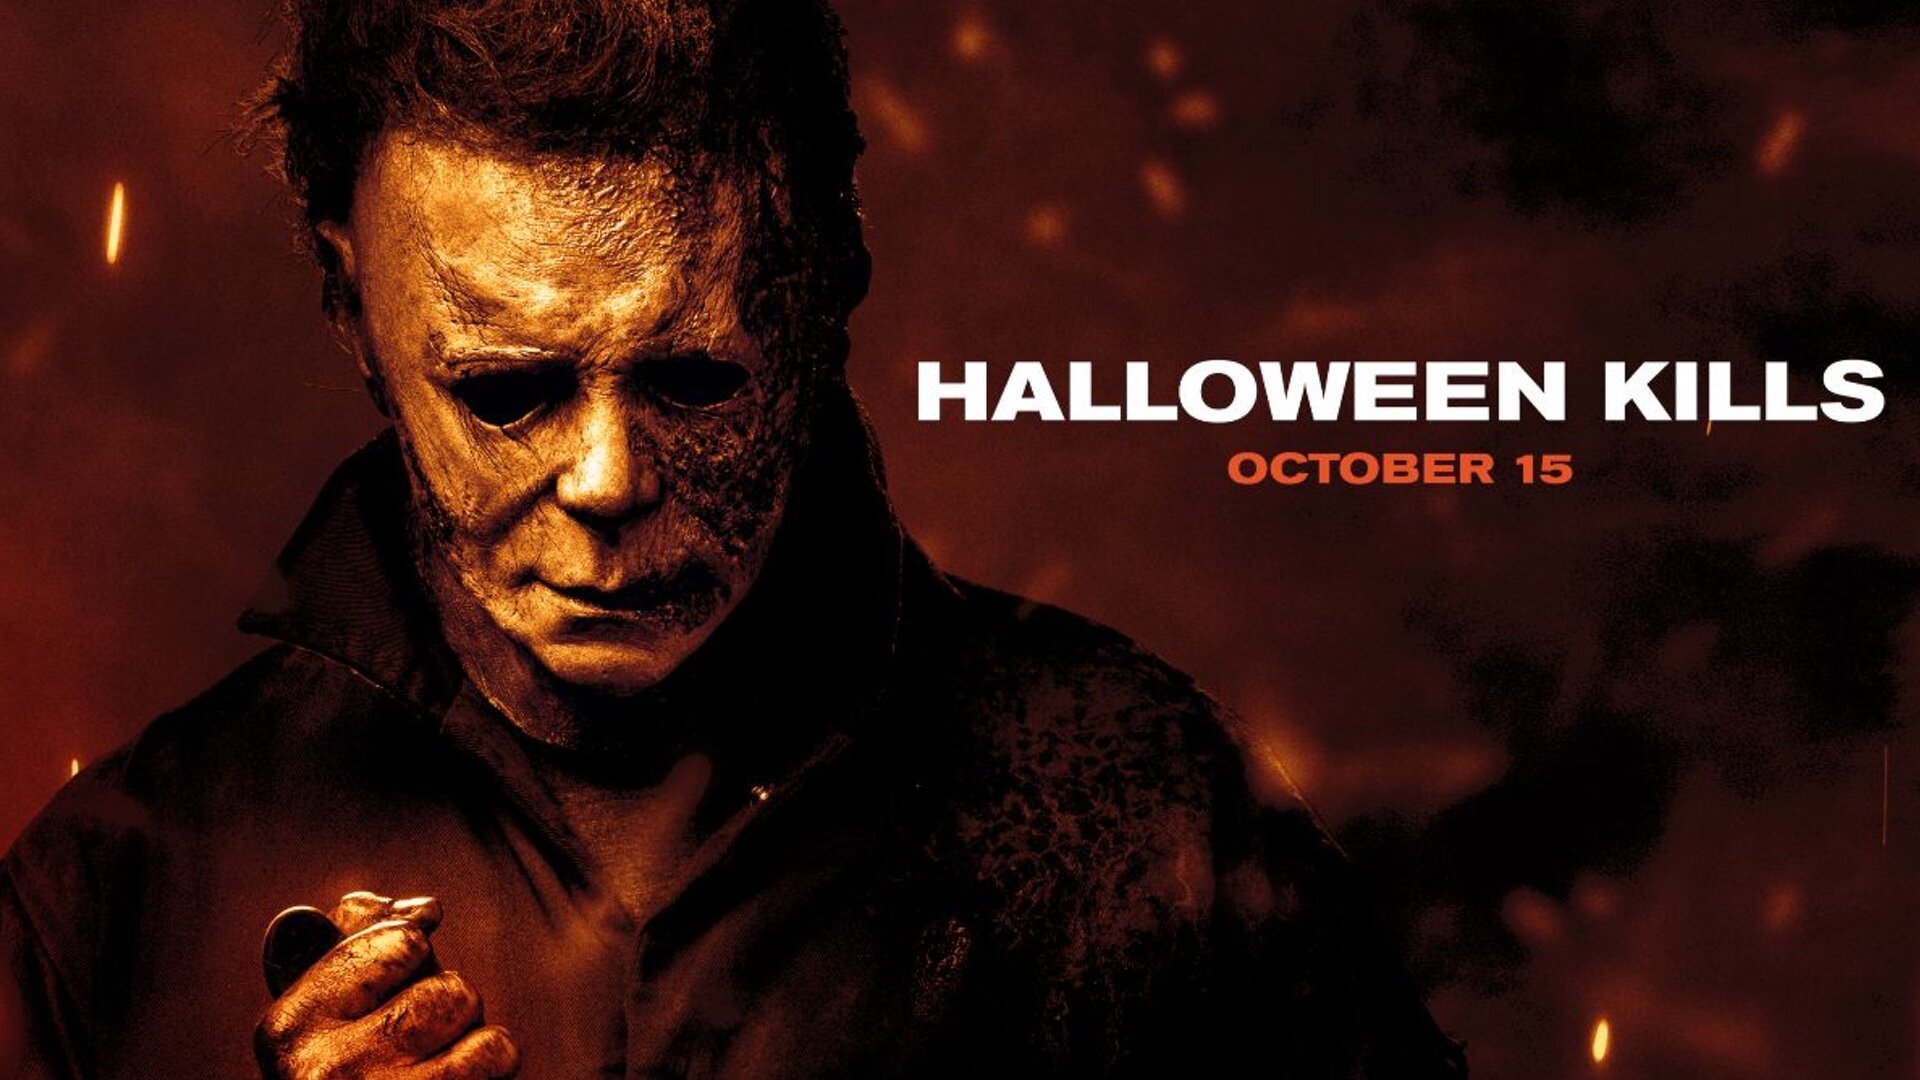 New HALLOWEEN KILLS Poster and Jason Blum Explains Why The Movie is